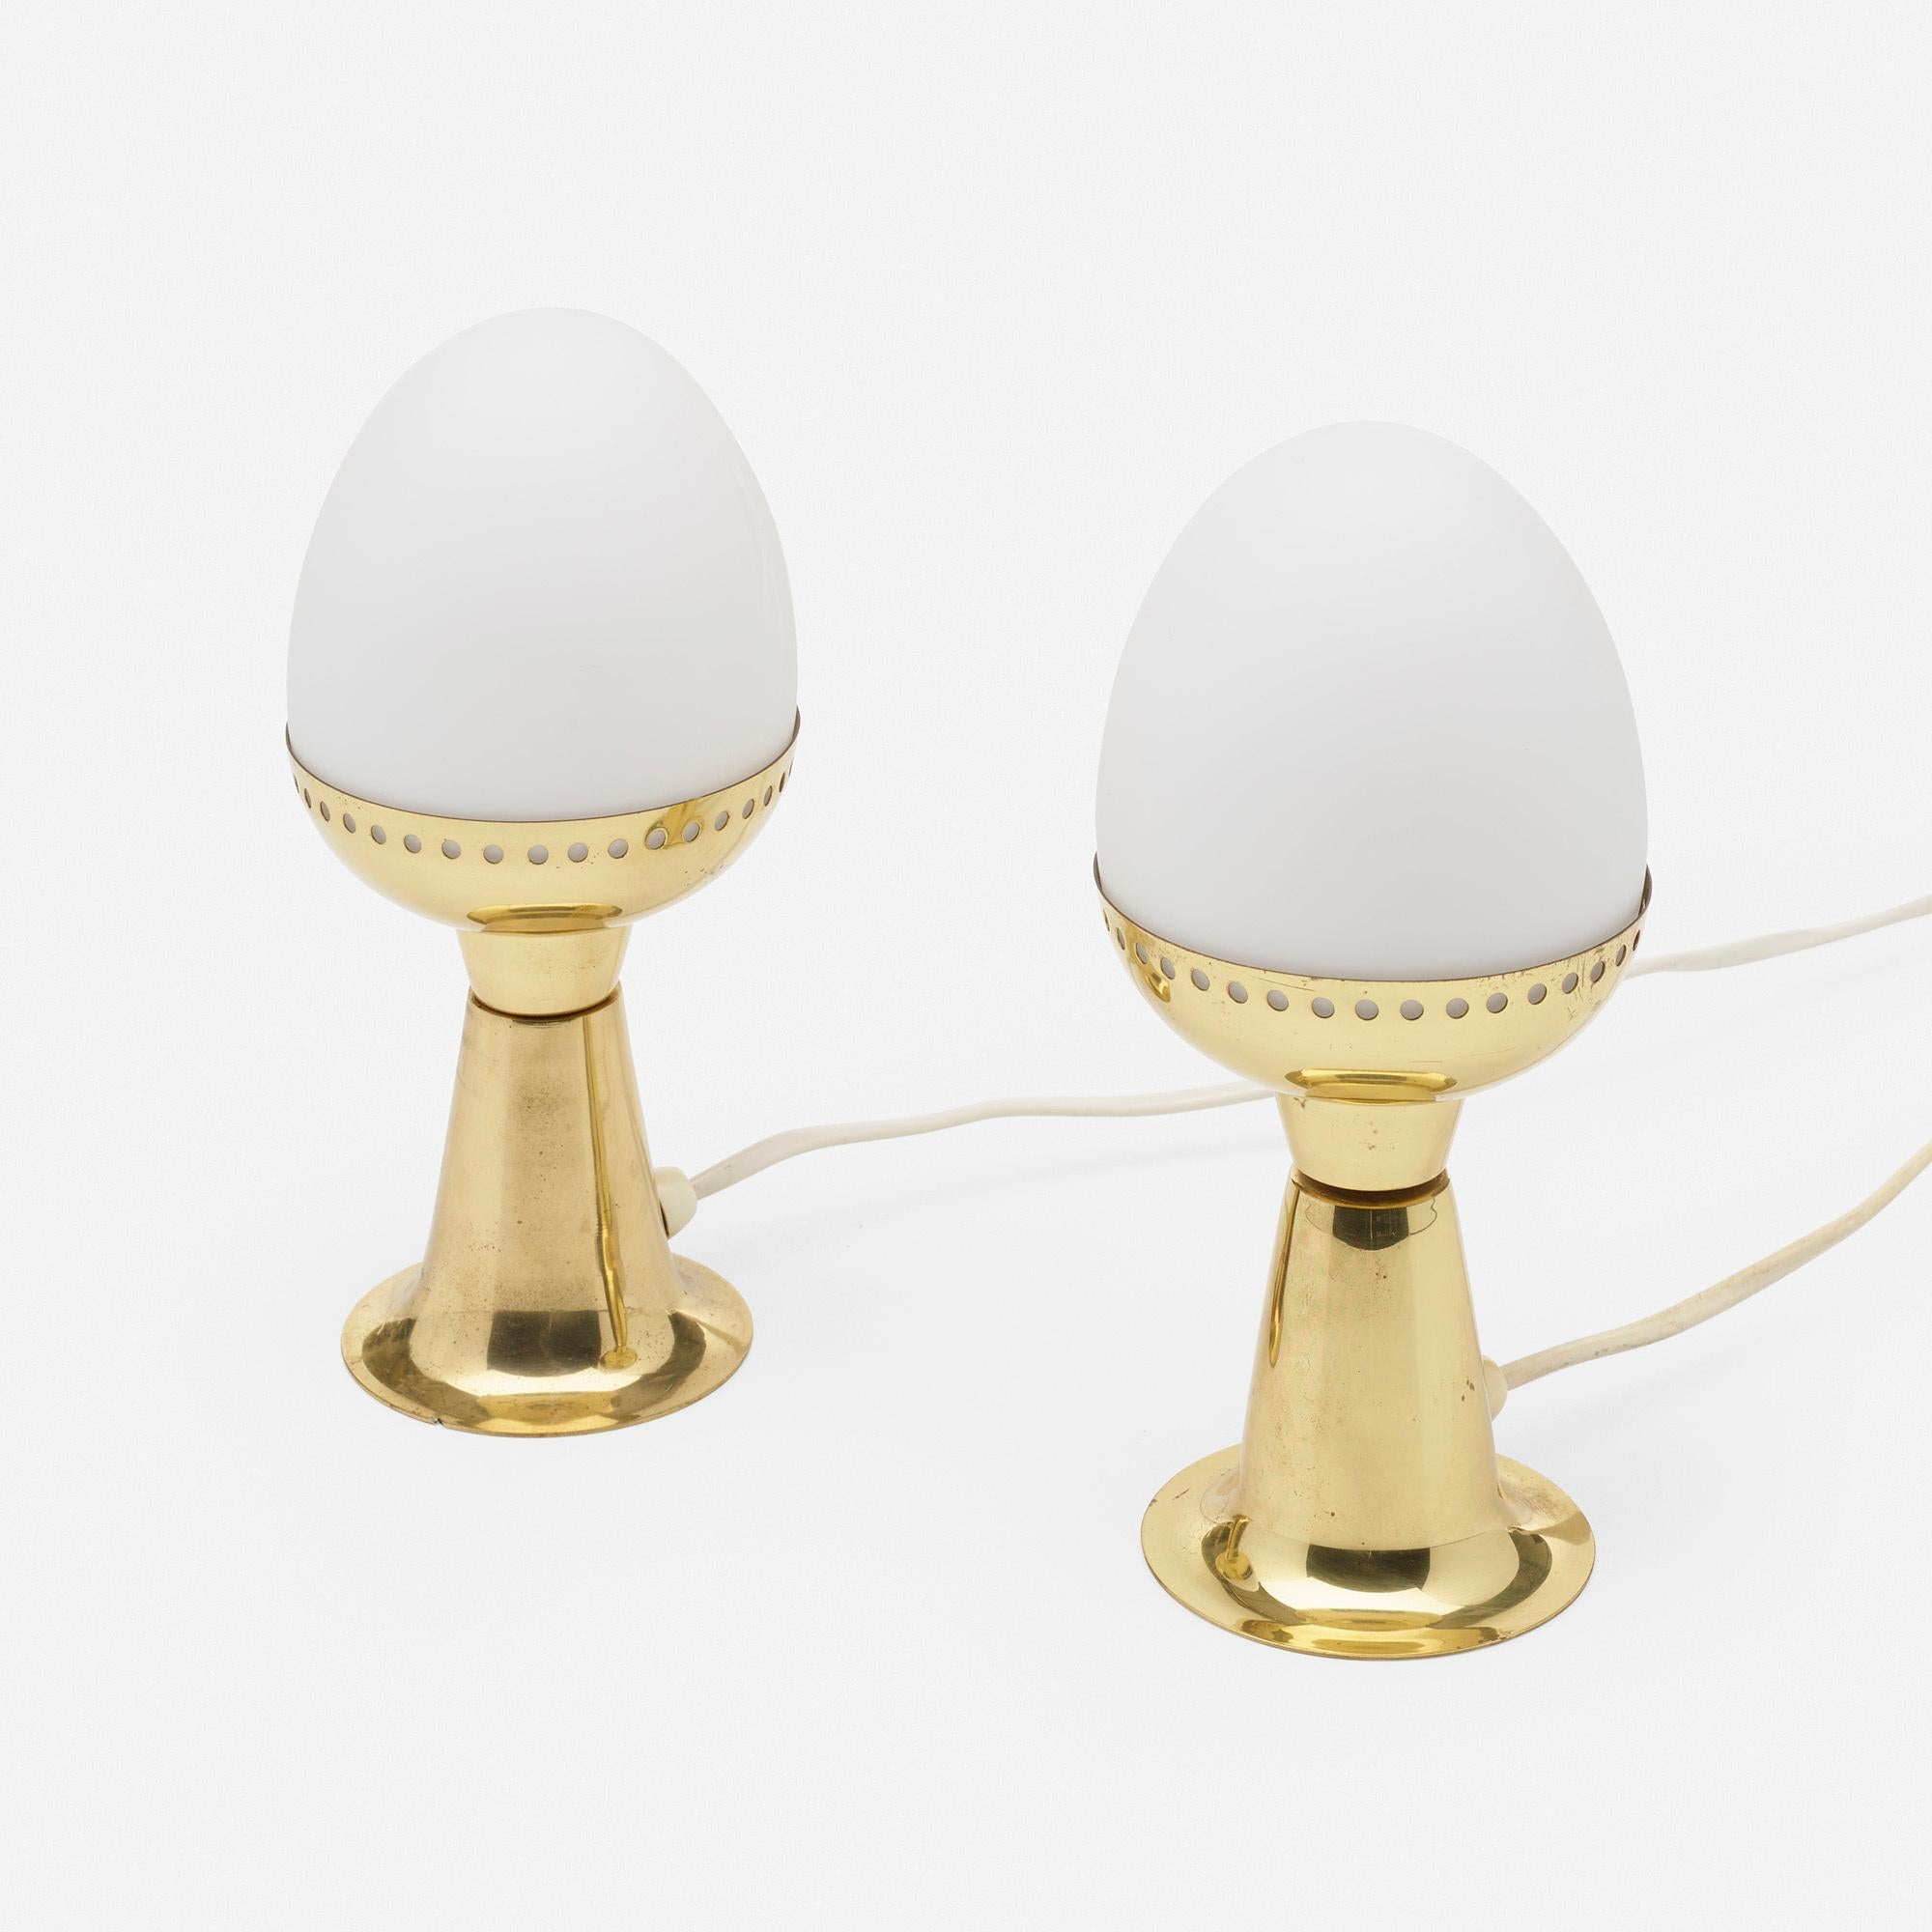 Pair of table lamps by Hans-Agne Jakobsson

Applied paper manufacturer's label to underside of each example ‘Hans-Agne Jakobsson Markaryd Made in Sweden’.
Made in Sweden

Additional information:
Material: Frosted glass, brass
Size: 4 Diameter